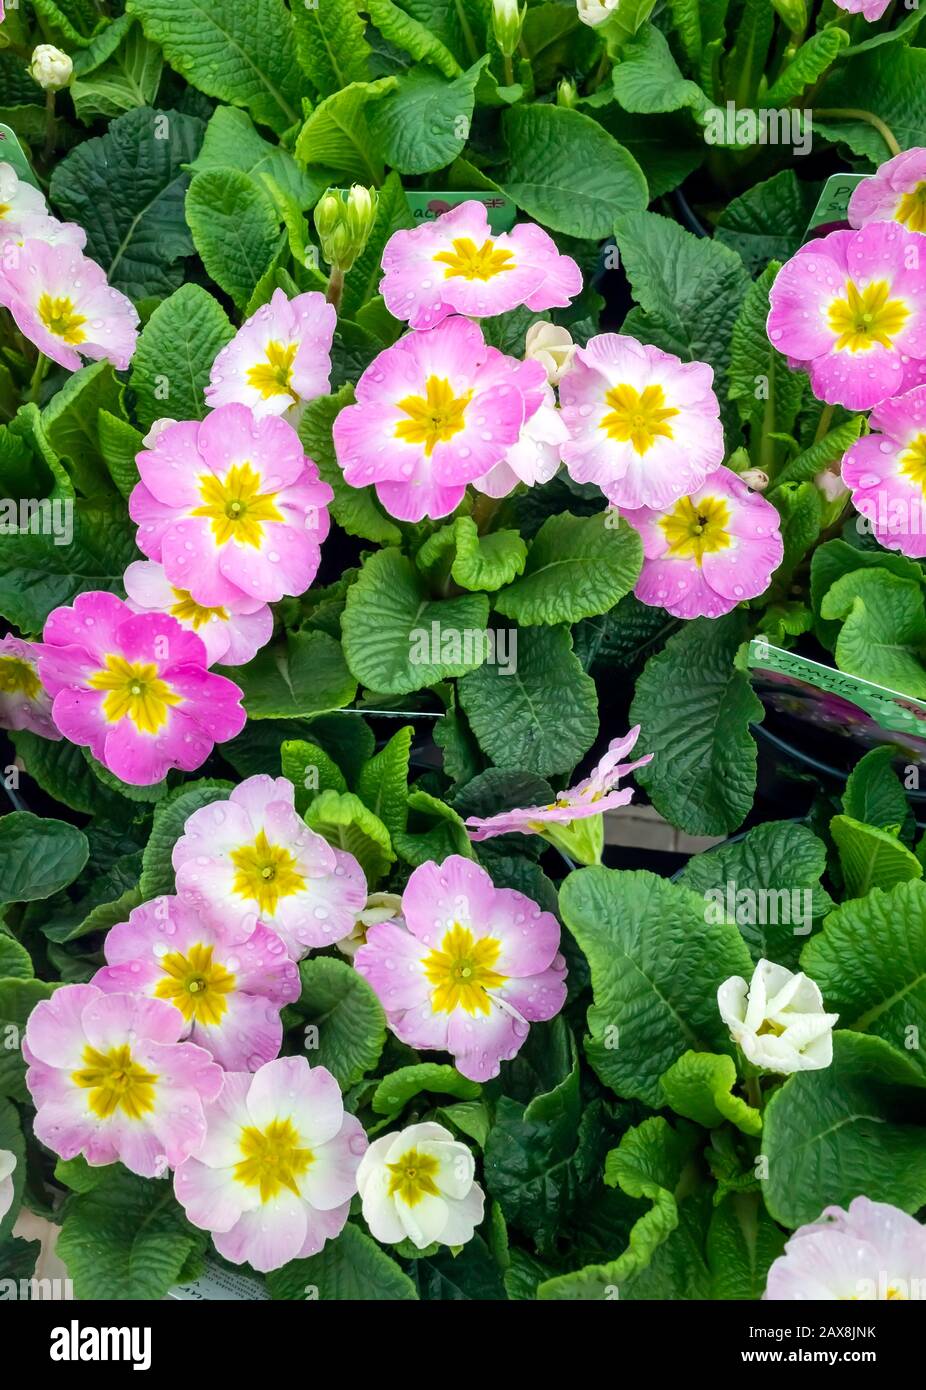 Primula plants variety acaulis Sweet 16  in a garden centre for sale ready for spring planting Stock Photo